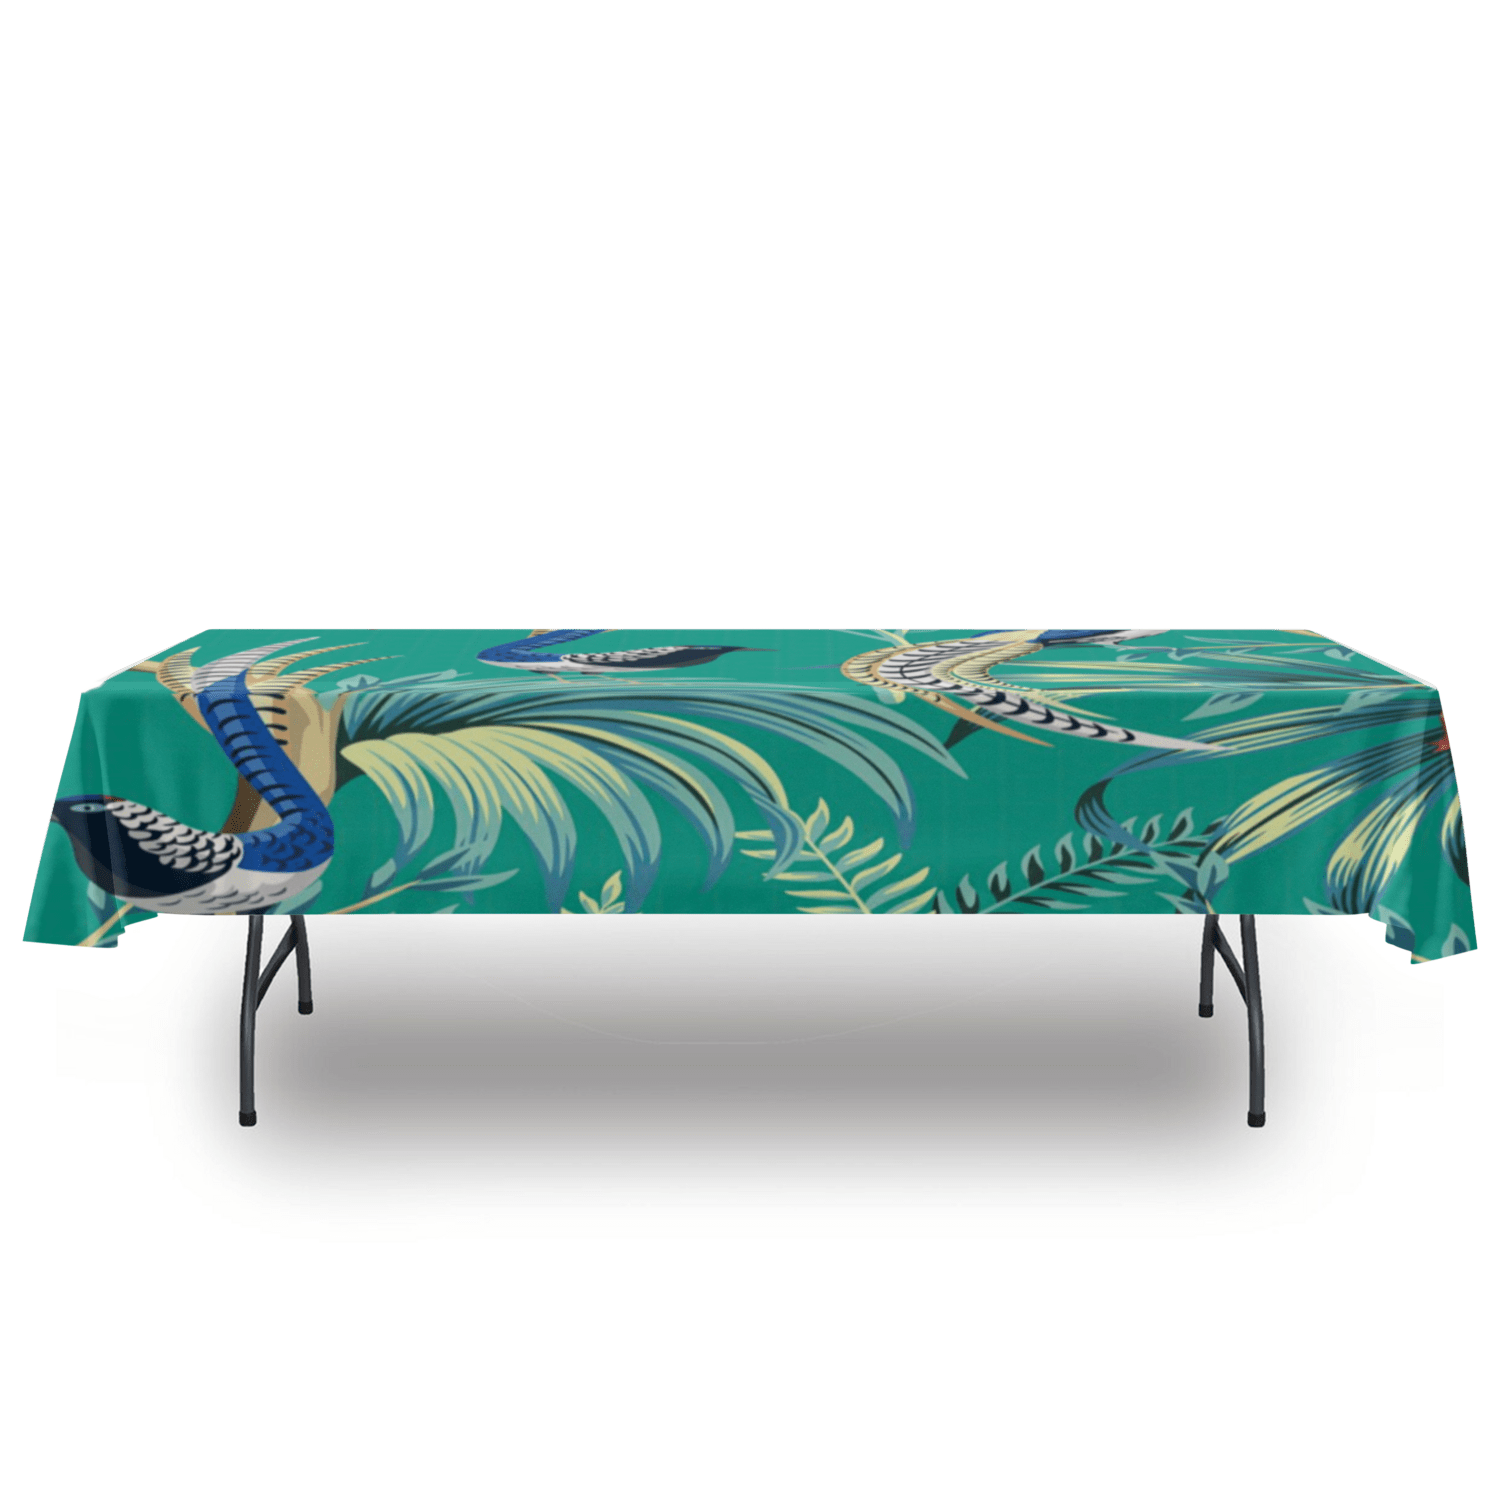 kate-mcenroe-nyc Chinoiserie Green Peacock Tablecloth Tablecloths 54" x 120" 100246